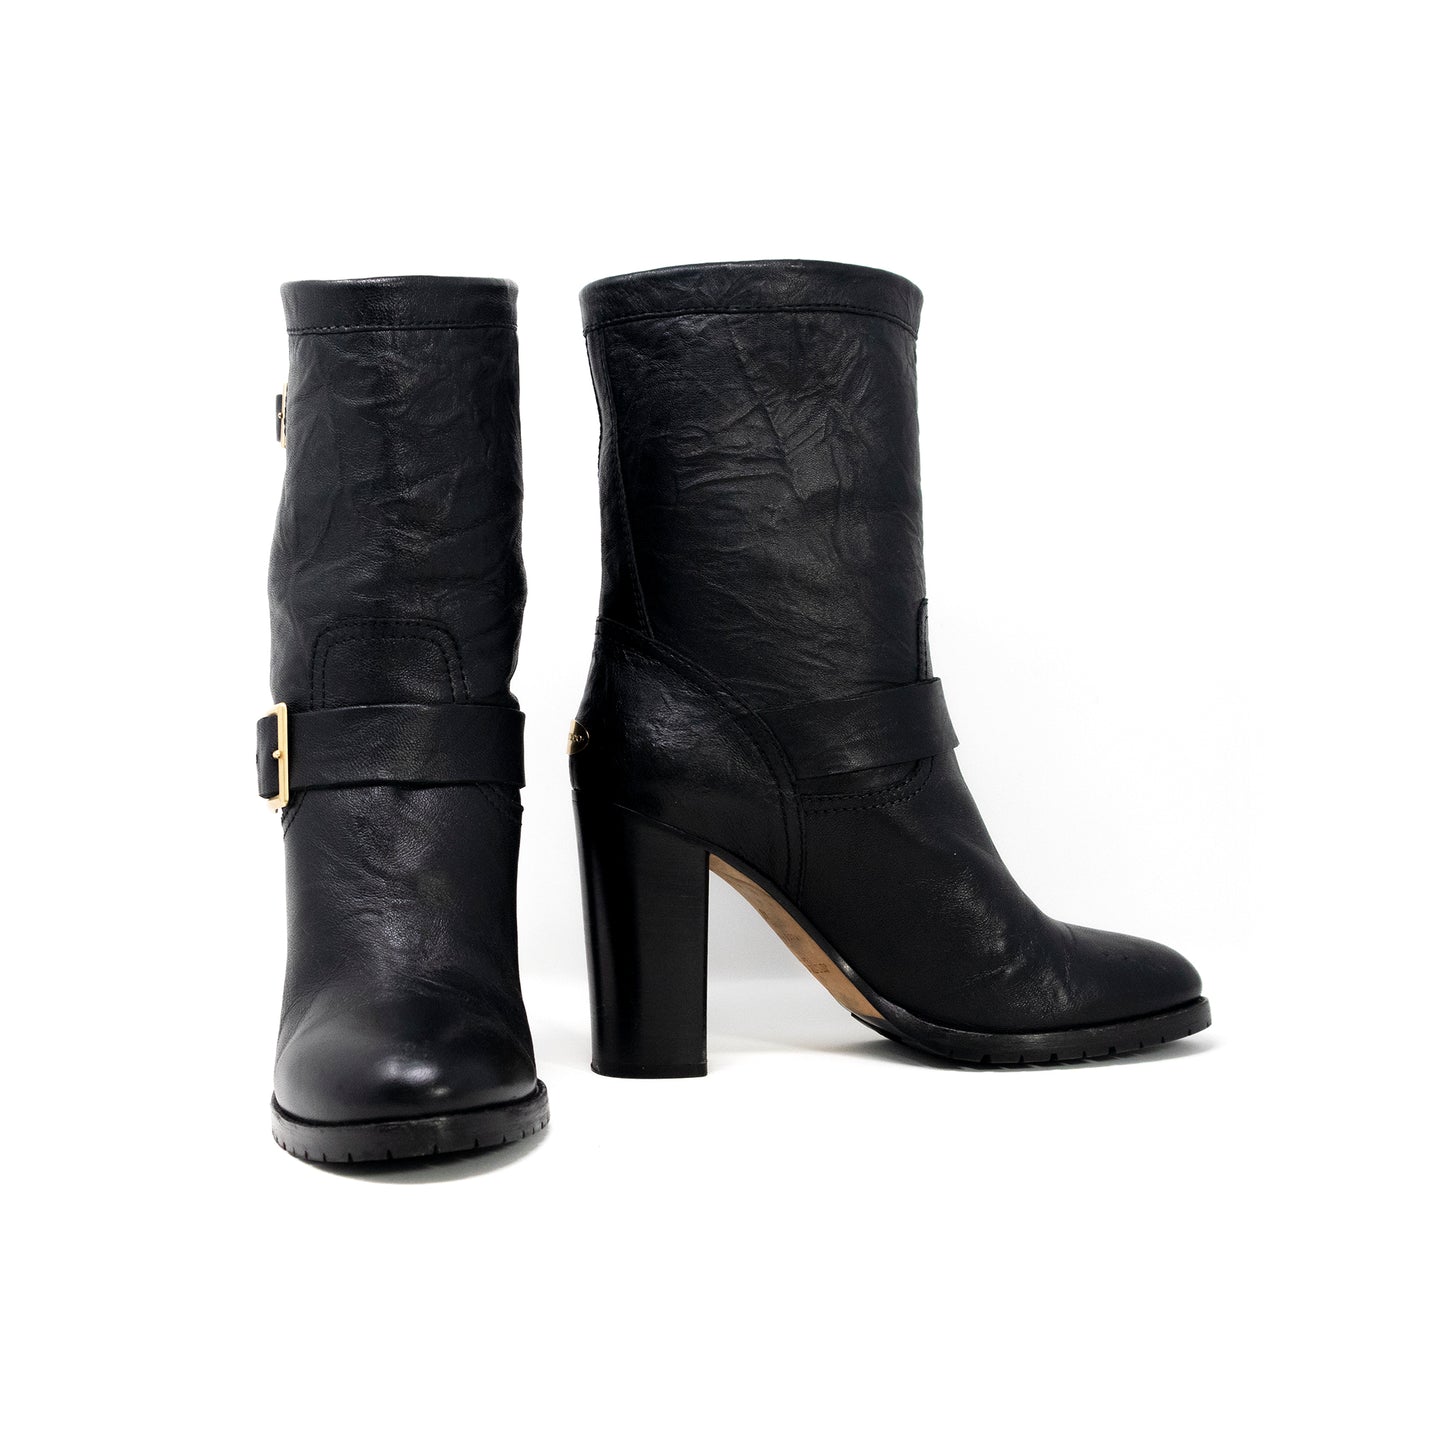 Jimmy Choo Leather Moto Boots - Size 40